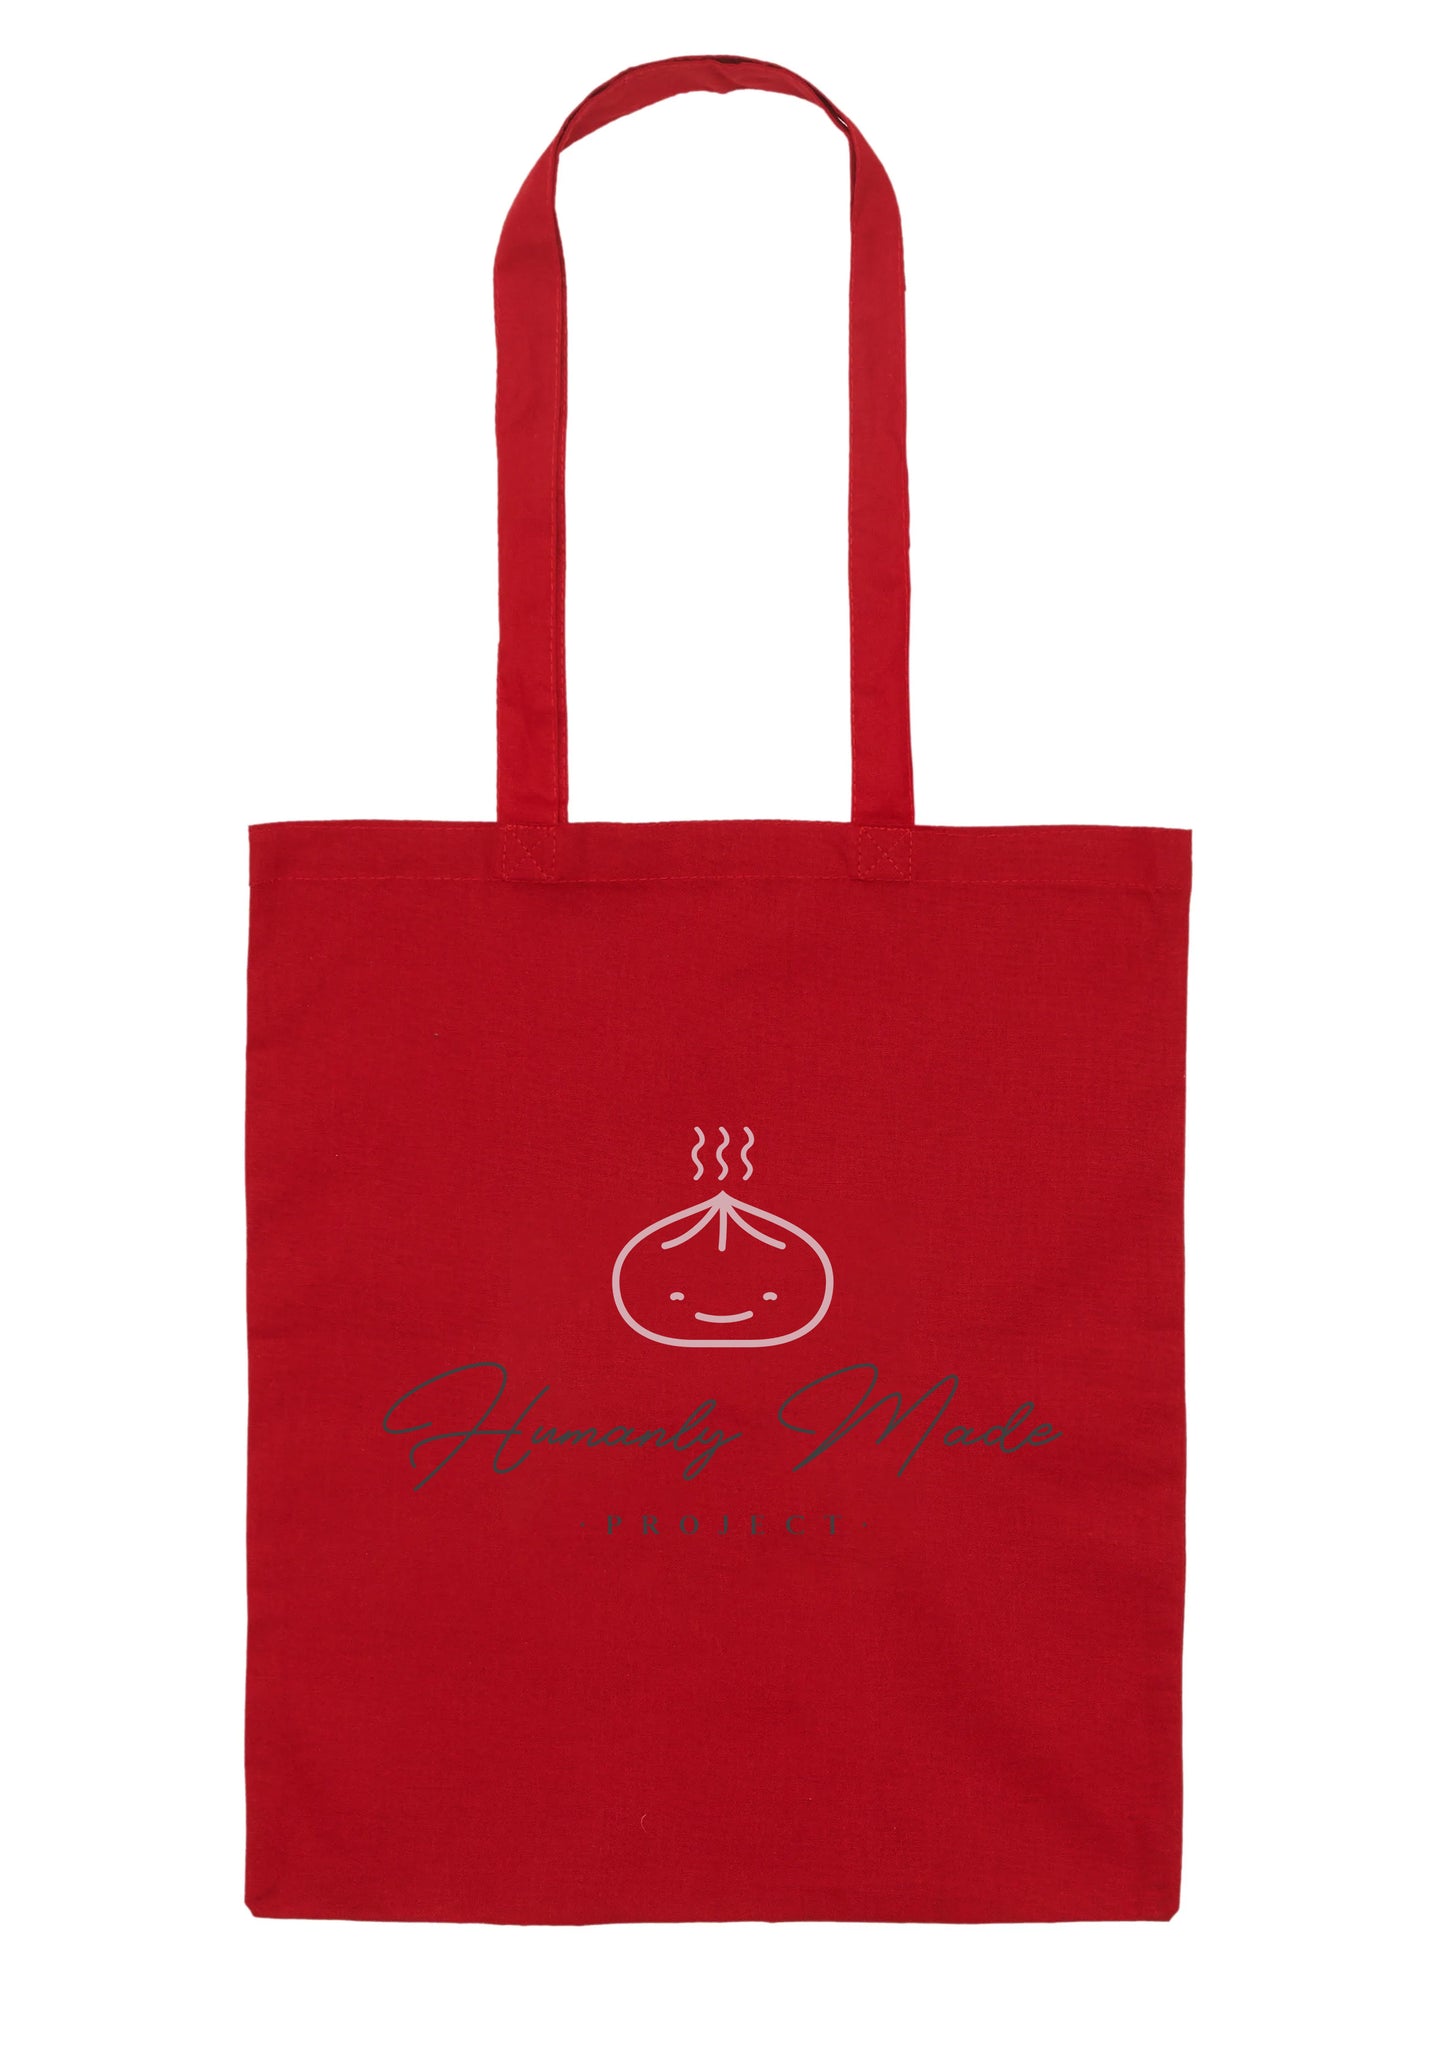 Humanly Made Promo Bag